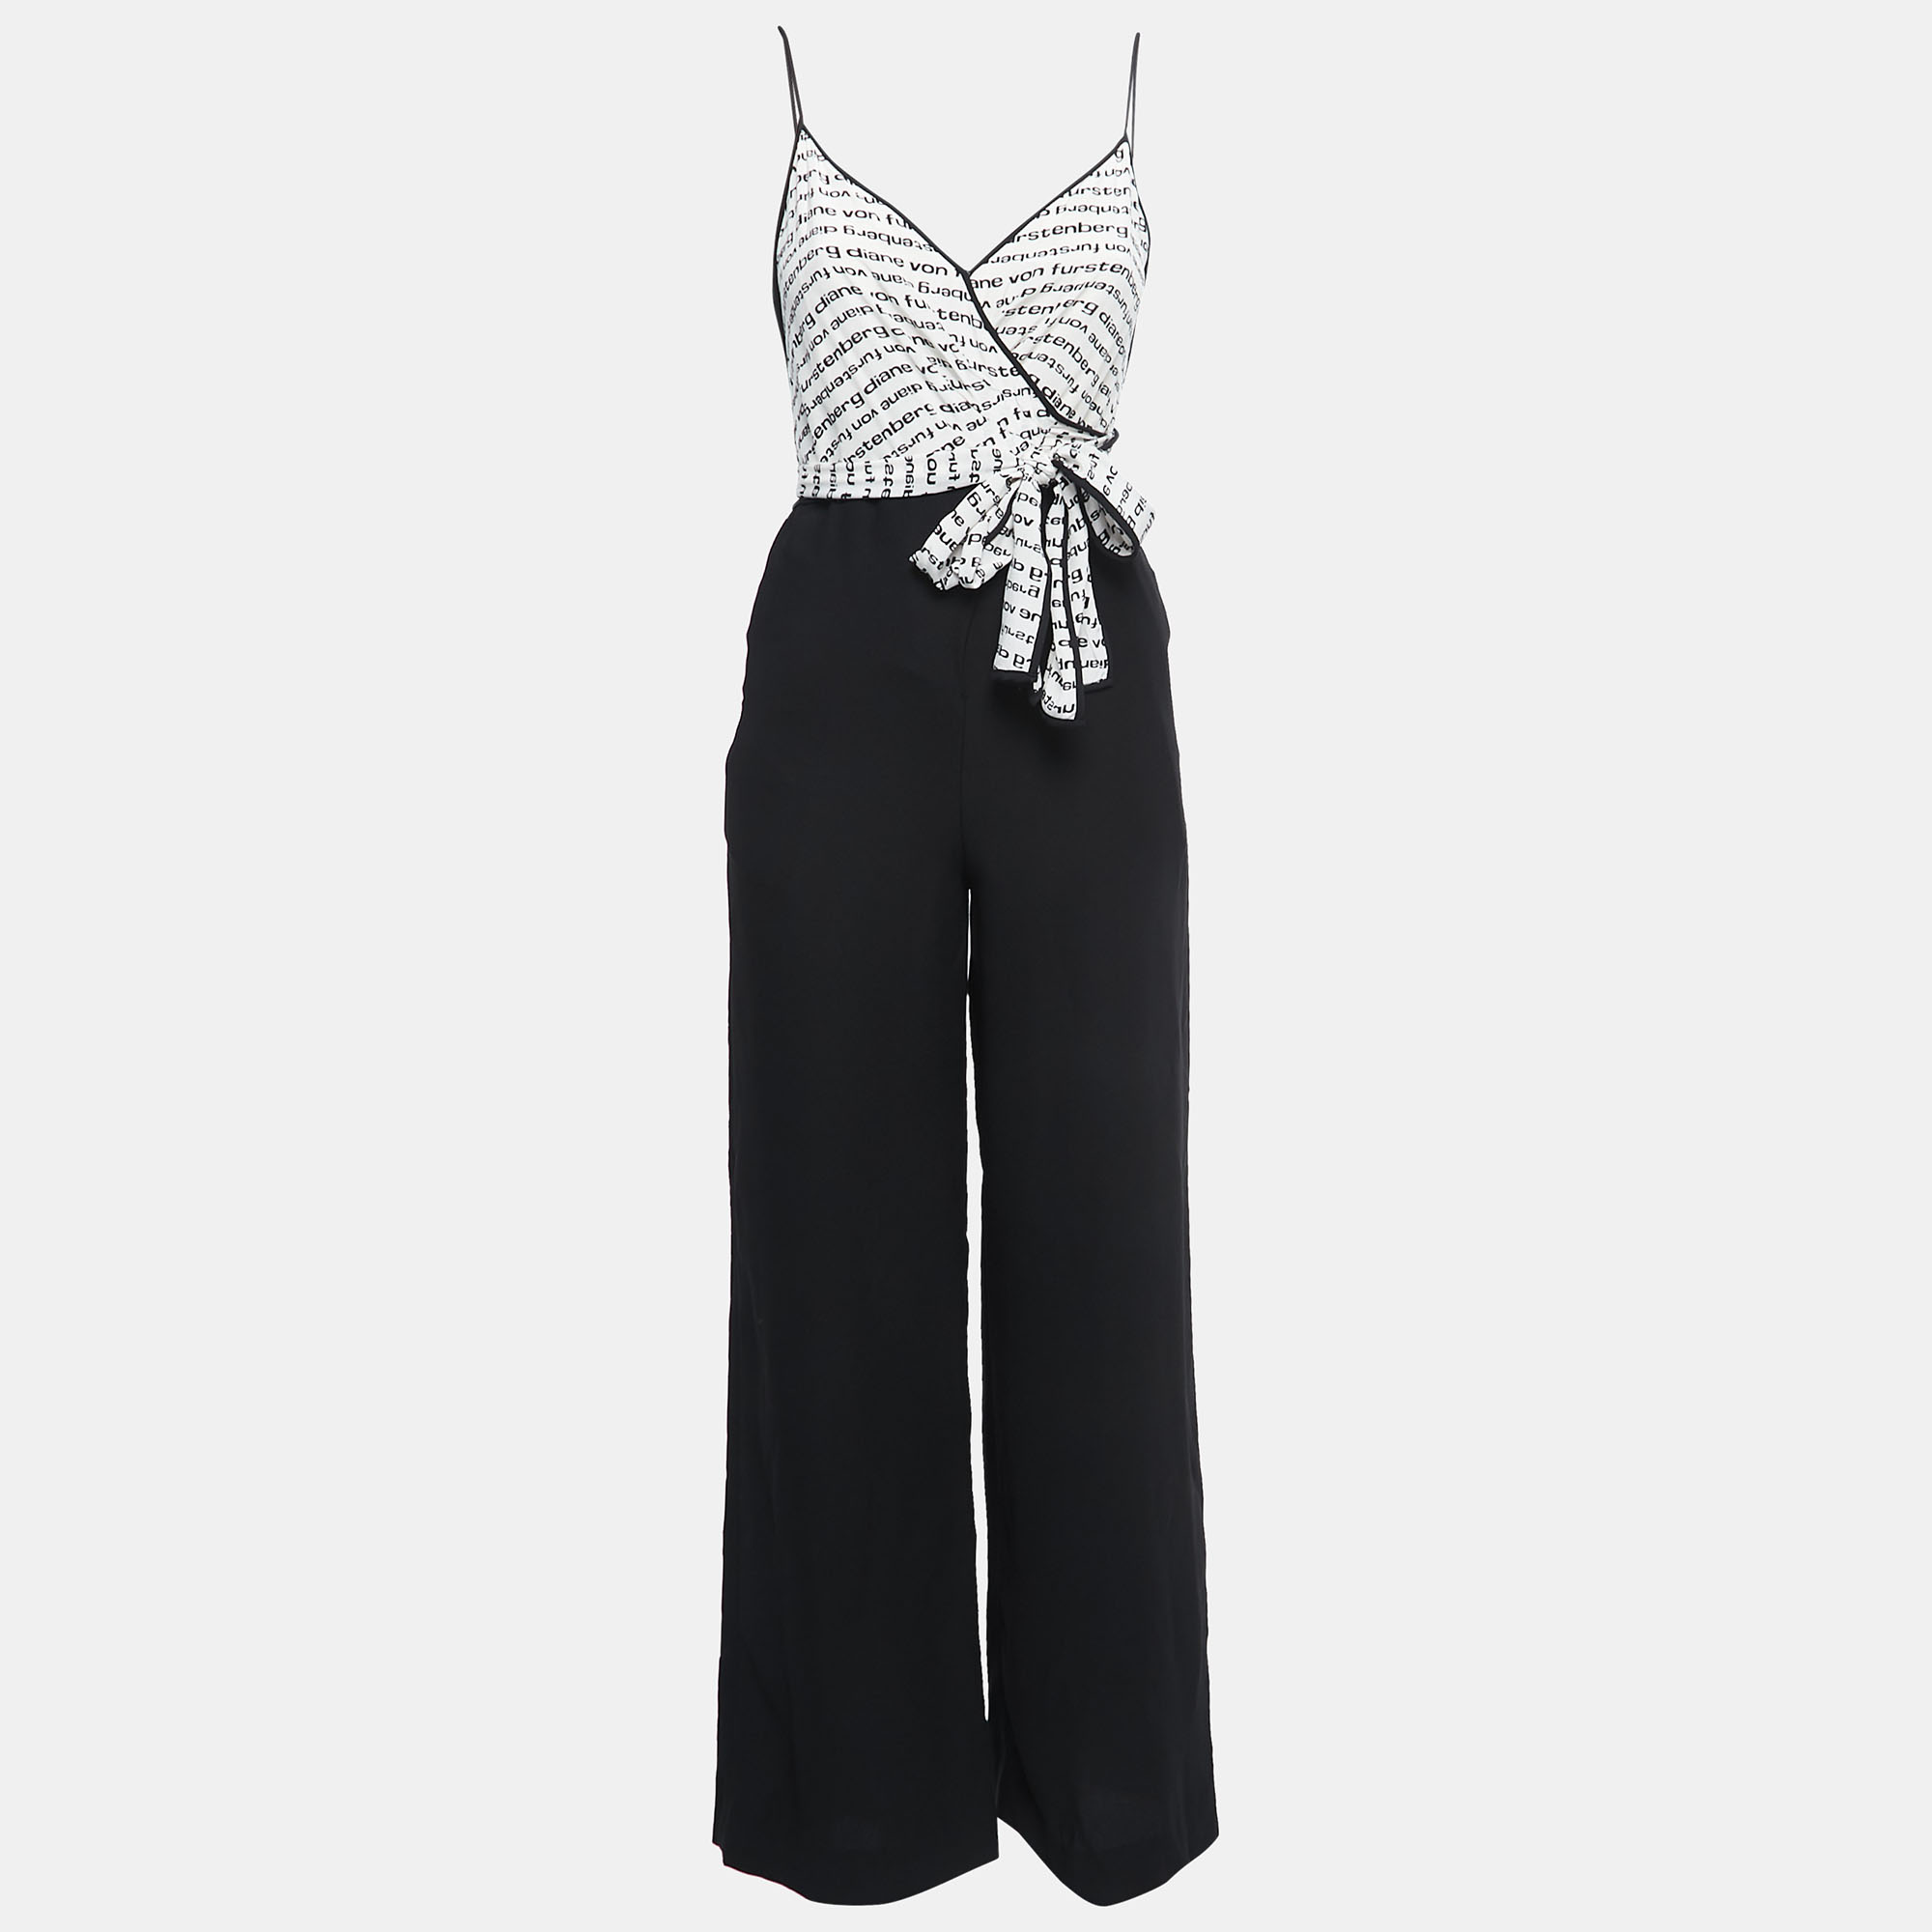 Bring a touch of sophistication and elegance to your look by wearing this jumpsuit. A flattering neckline classy hue and noticeable details define this jumpsuit. Style it with high heels.